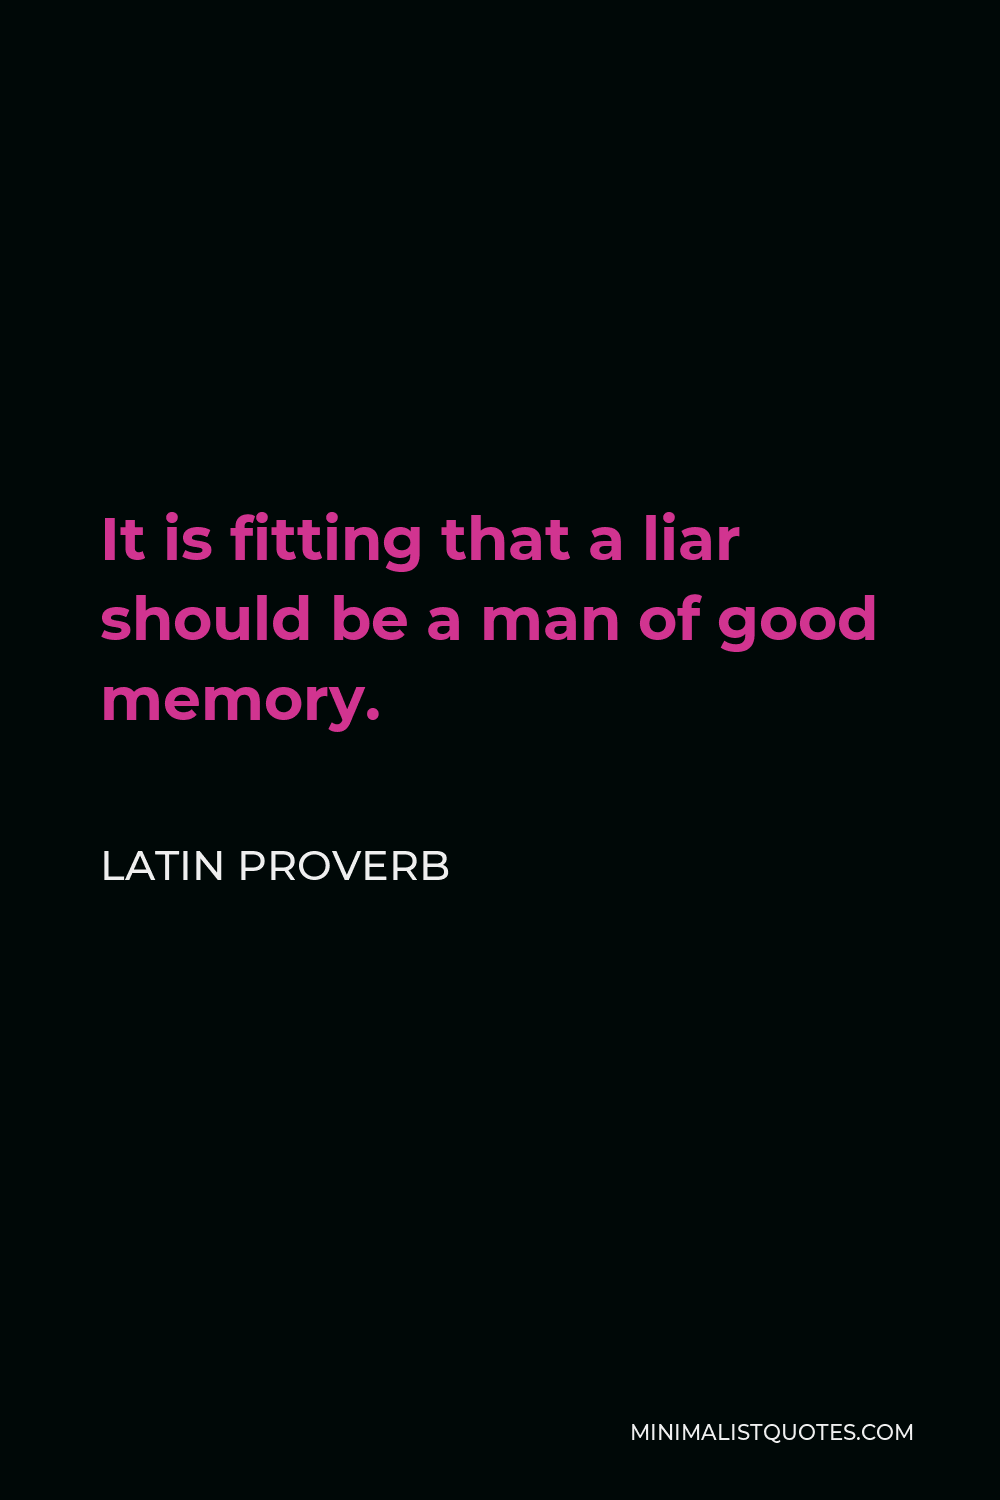 Latin Proverb Quote - It is fitting that a liar should be a man of good memory.